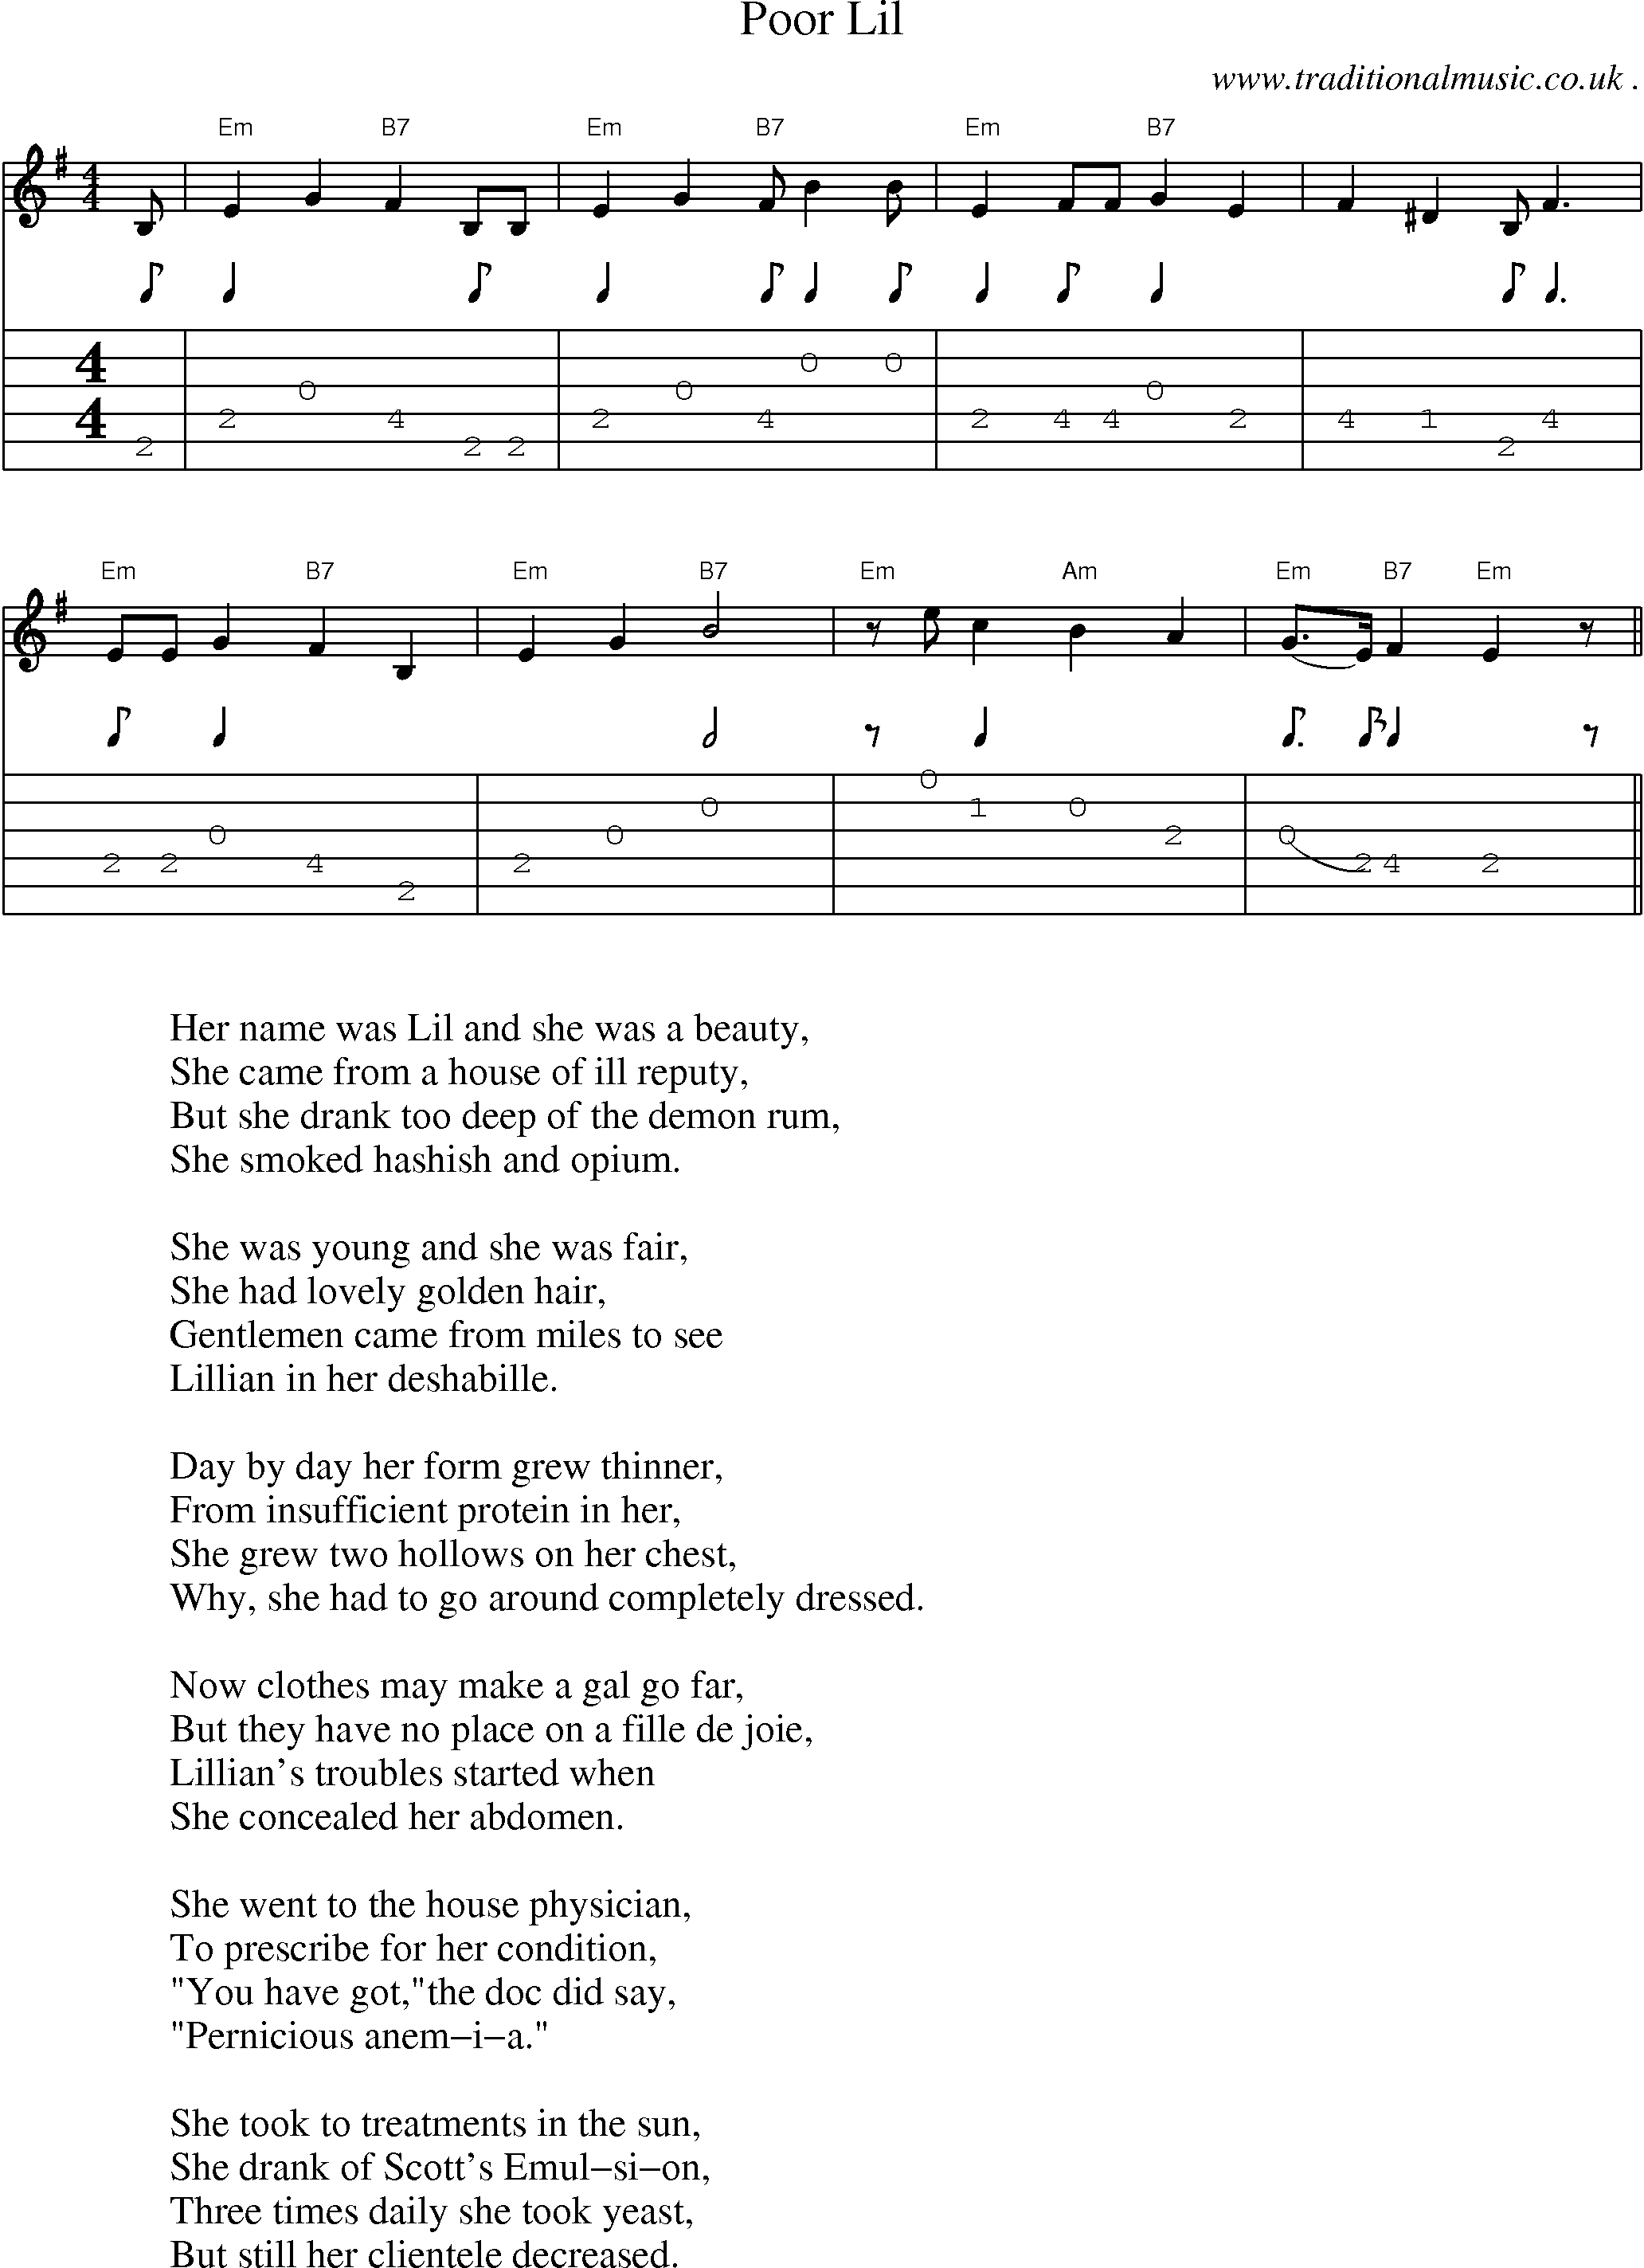 Sheet-Music and Guitar Tabs for Poor Lil